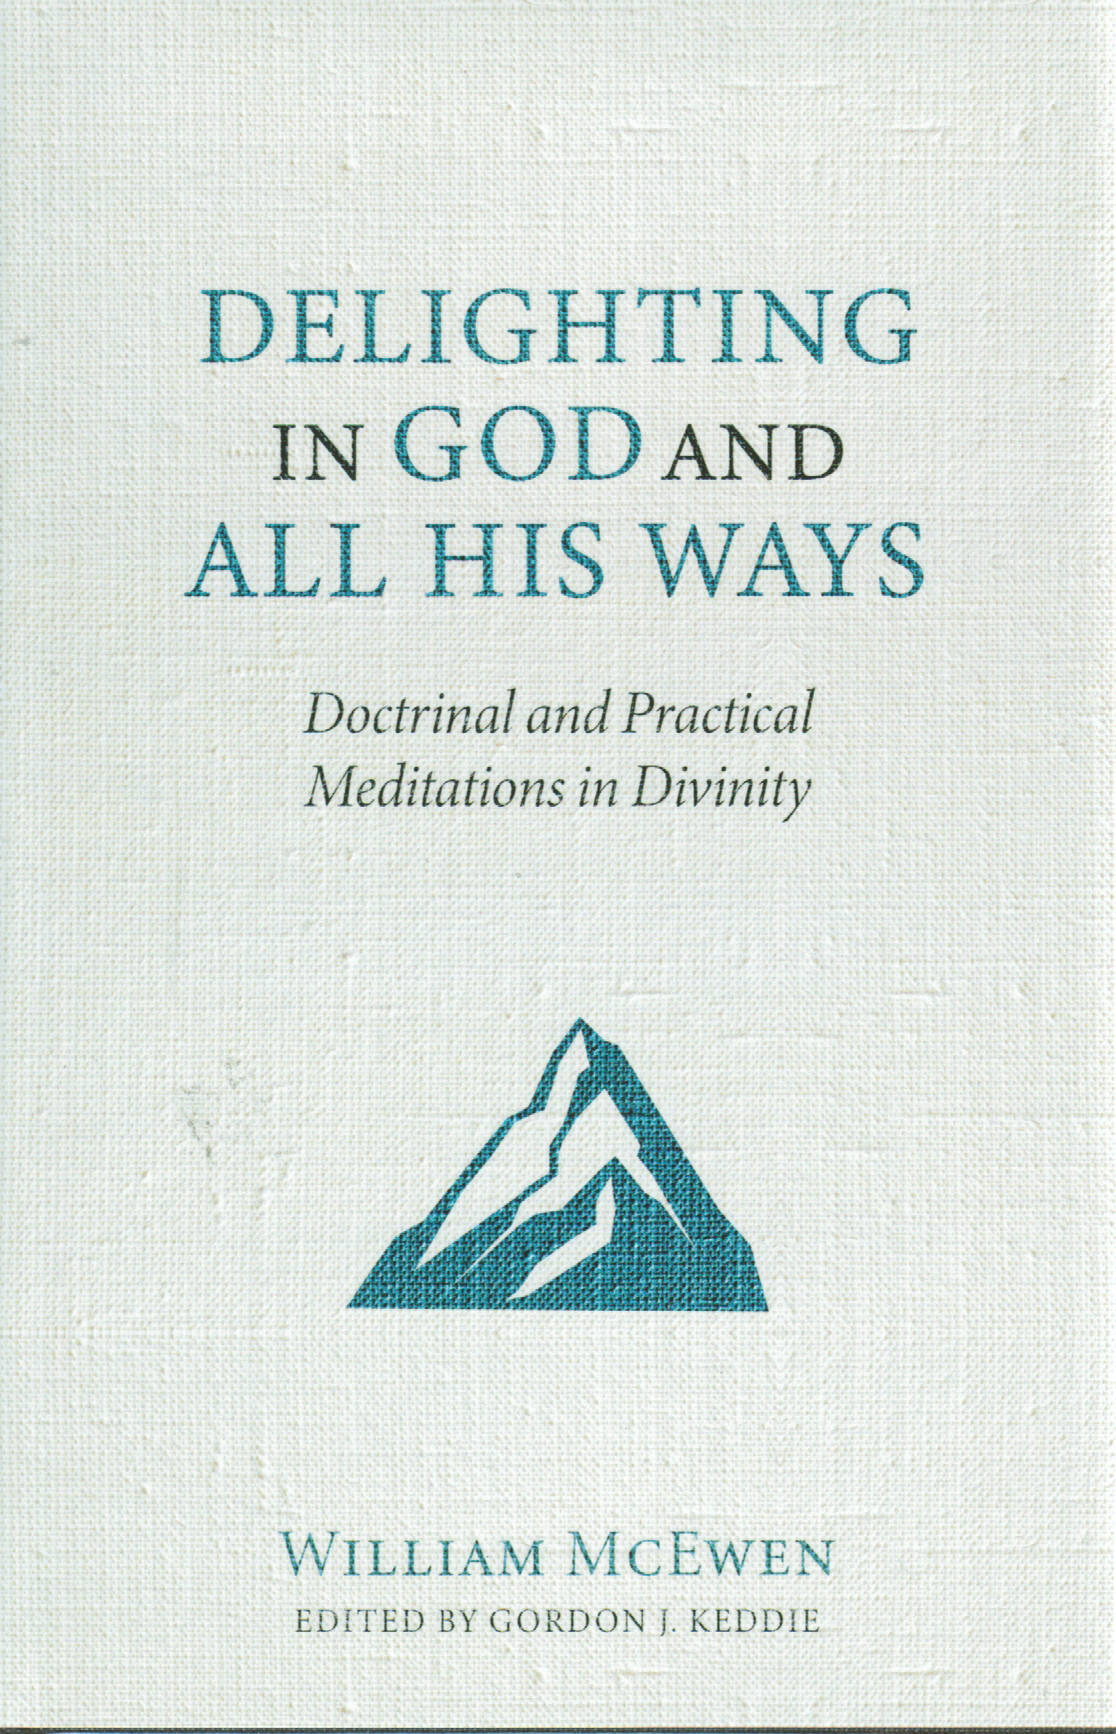 Delighting in God and All His Ways: Doctrinal and Practical Meditations in Divinity